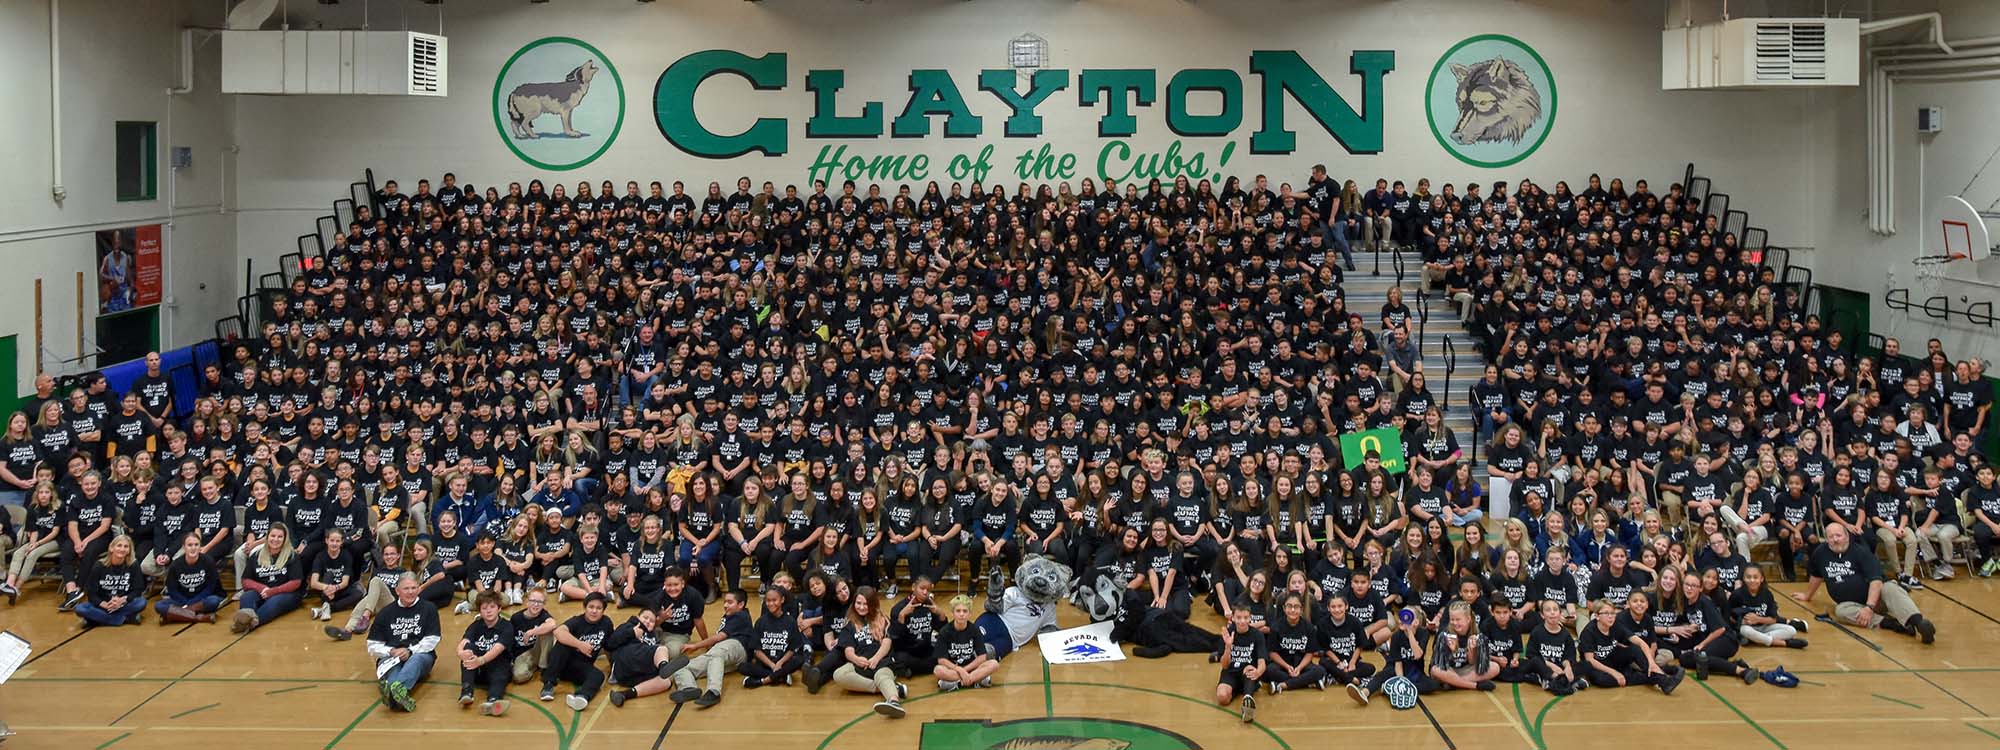 Clayton Middle School students pose for an all-school photo in new, black T-shirts at a College Day pep rally